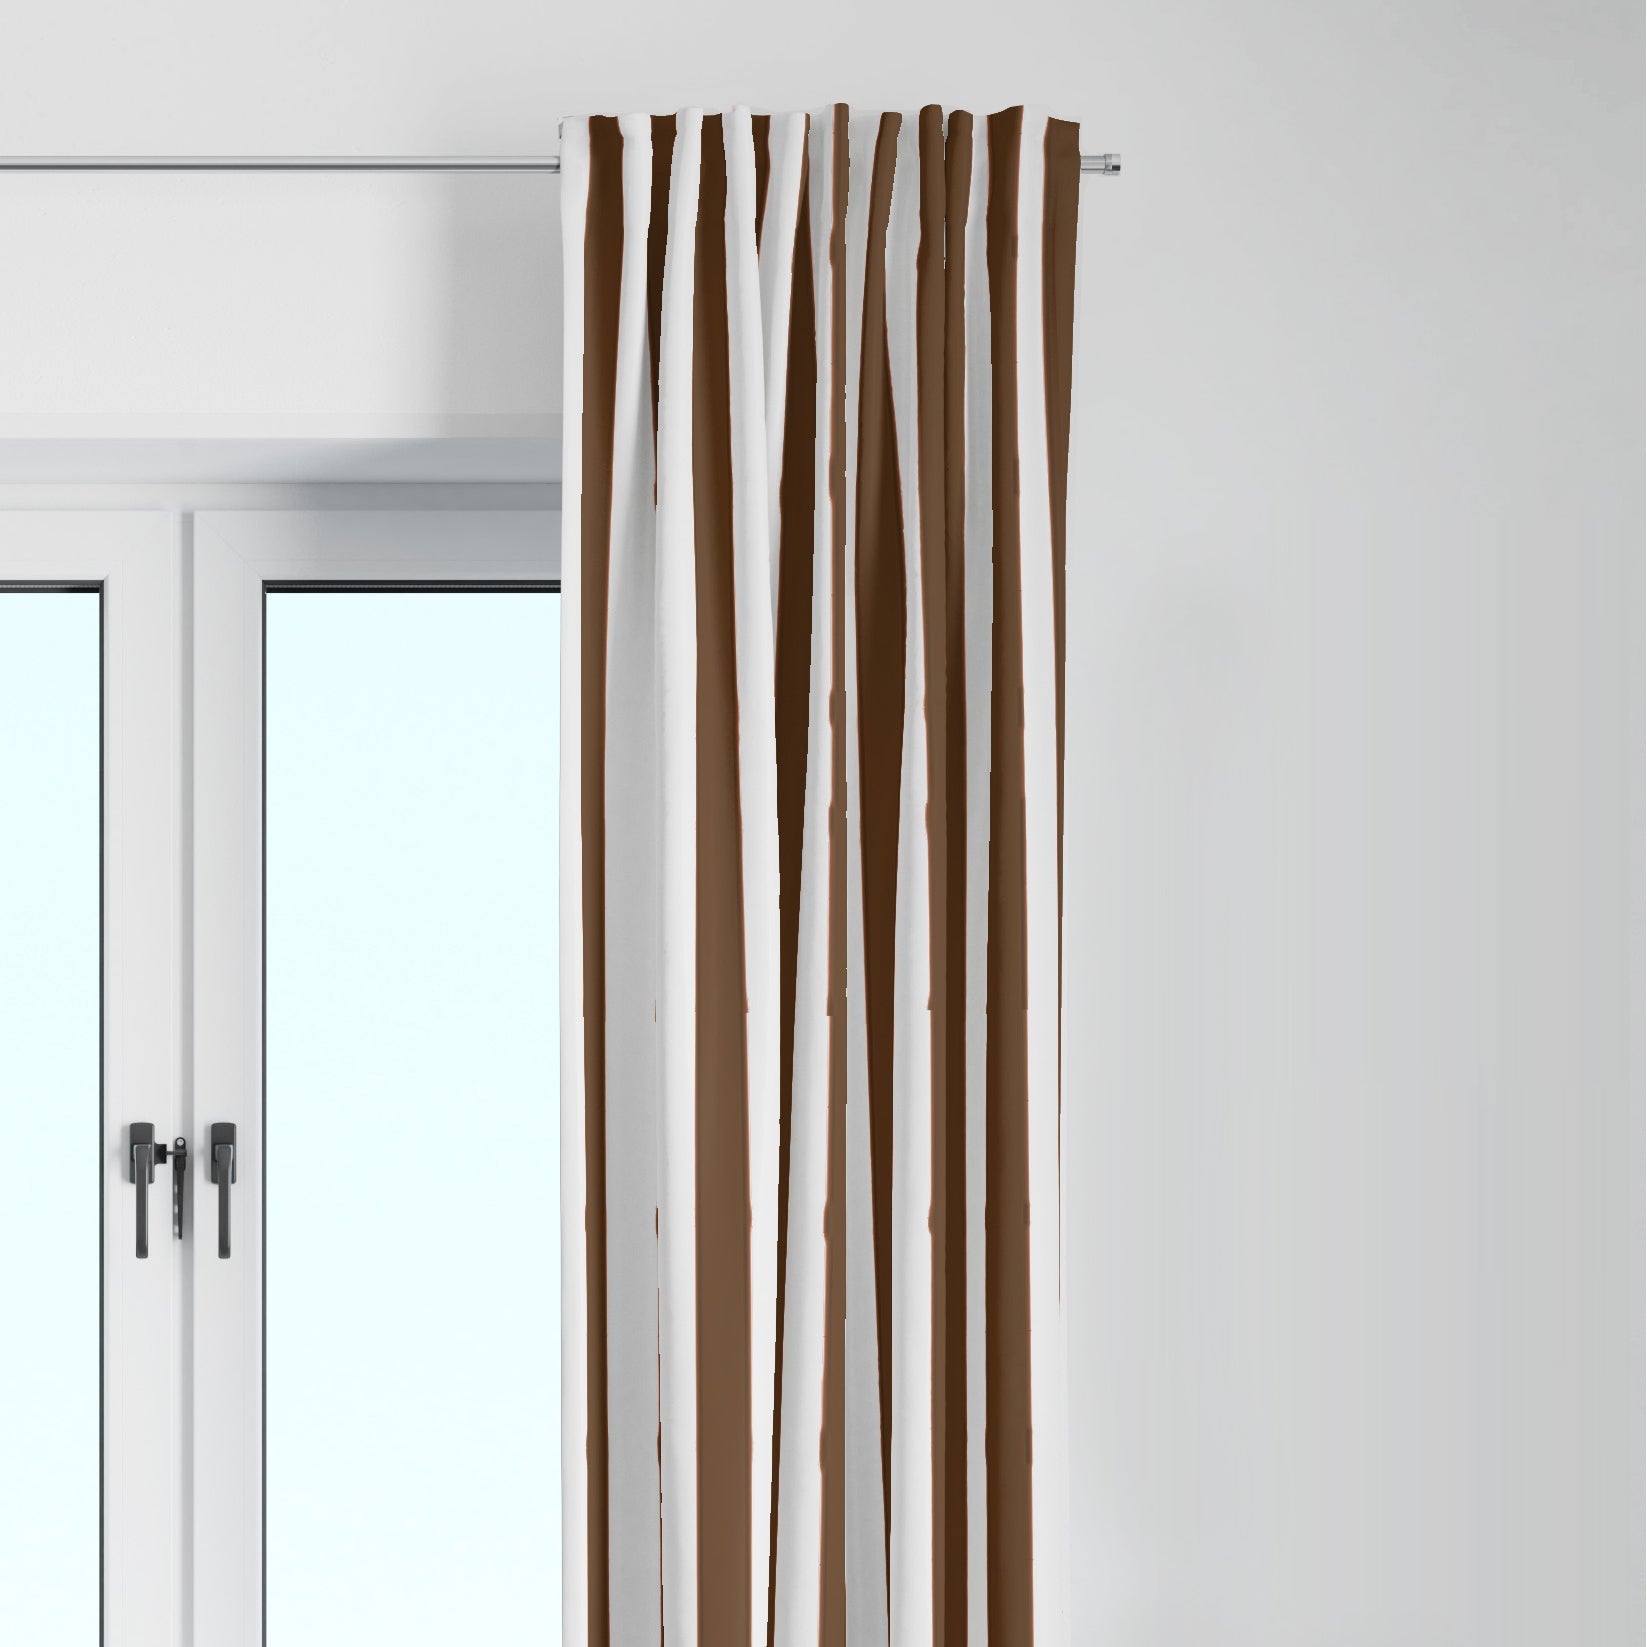 Bacati - Single Light Filtering Curtain Panel Stripes Brown/White - image 1 of 5